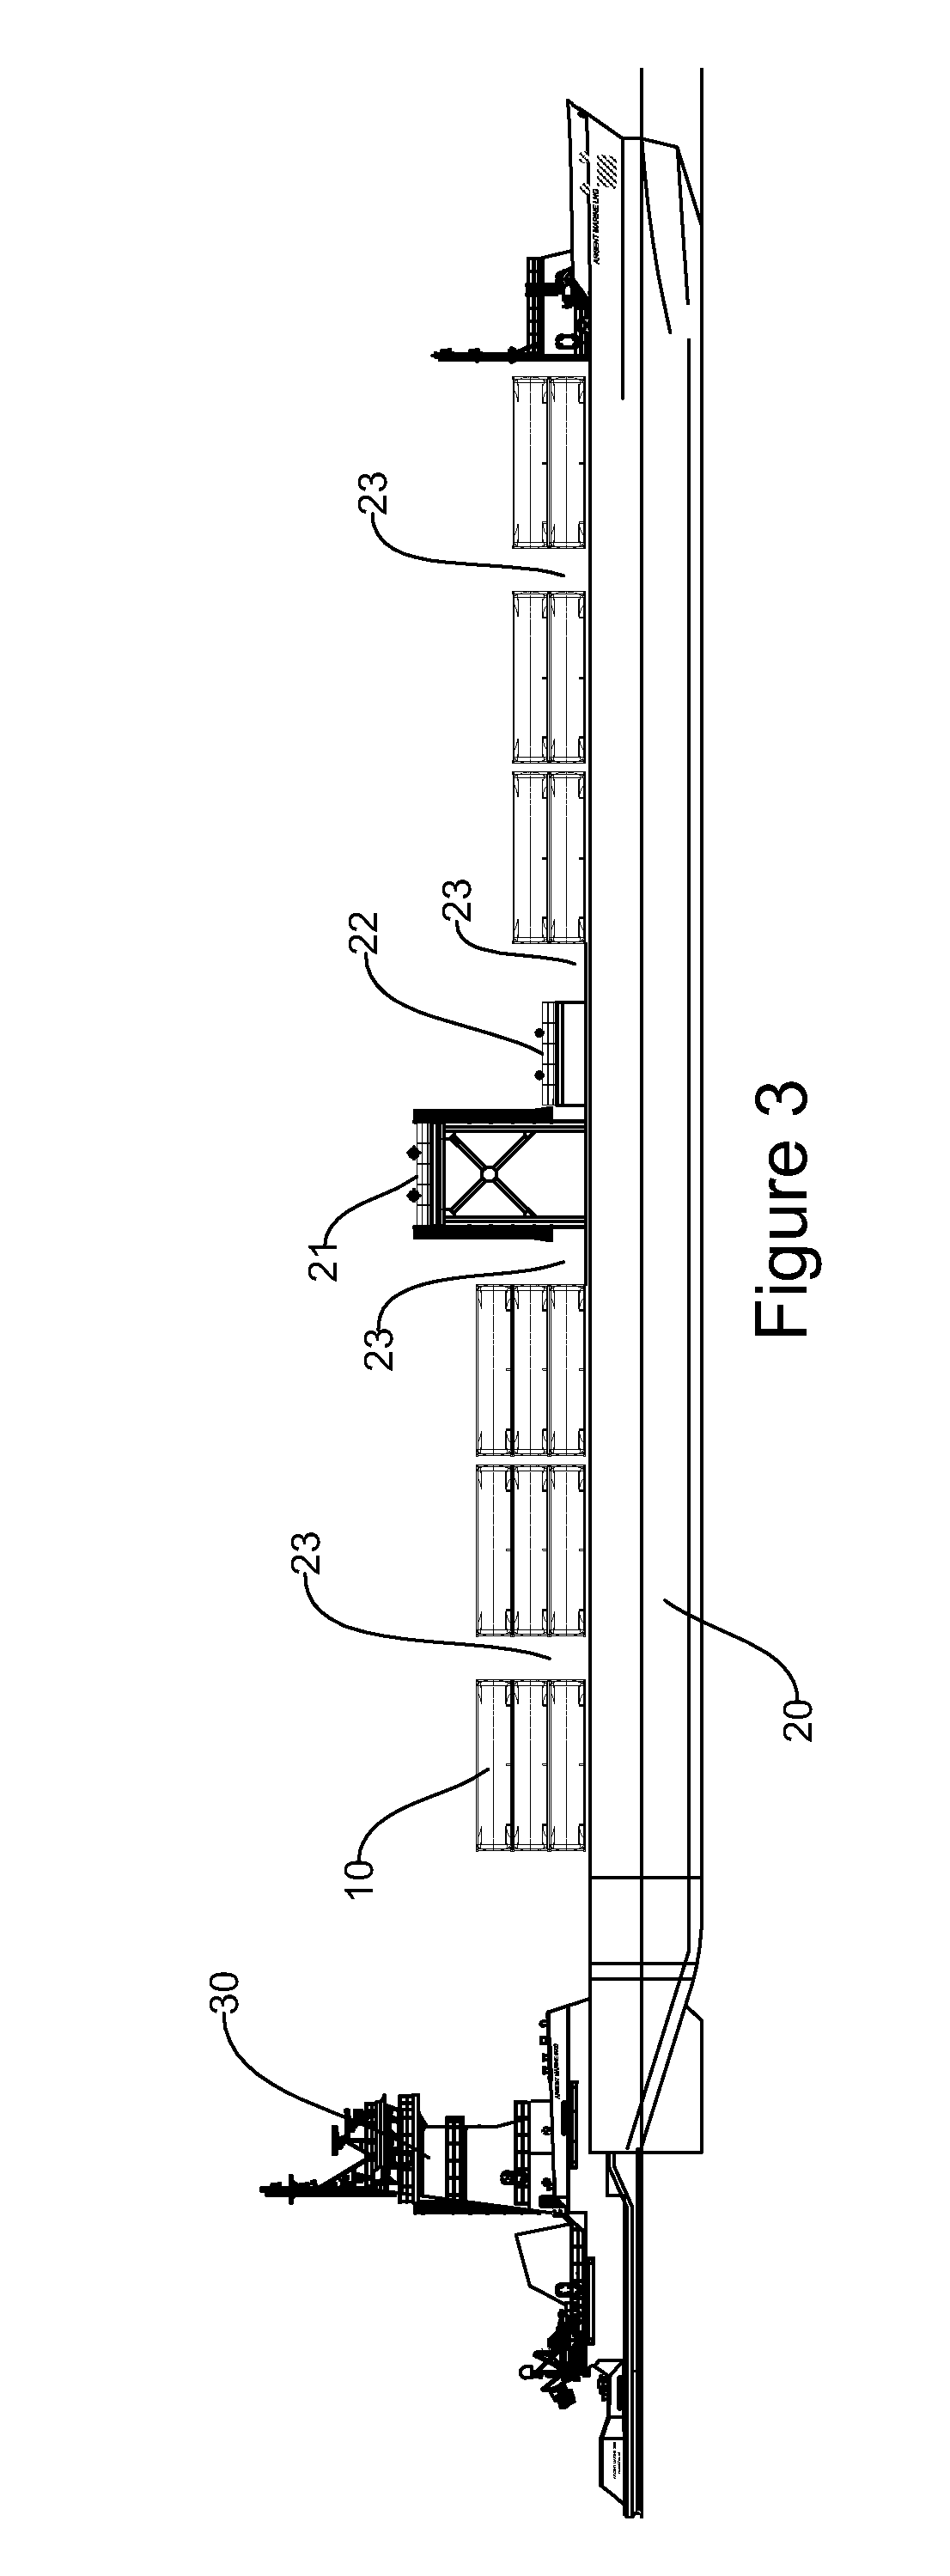 System and method for containerized transport of liquids by marine vessel